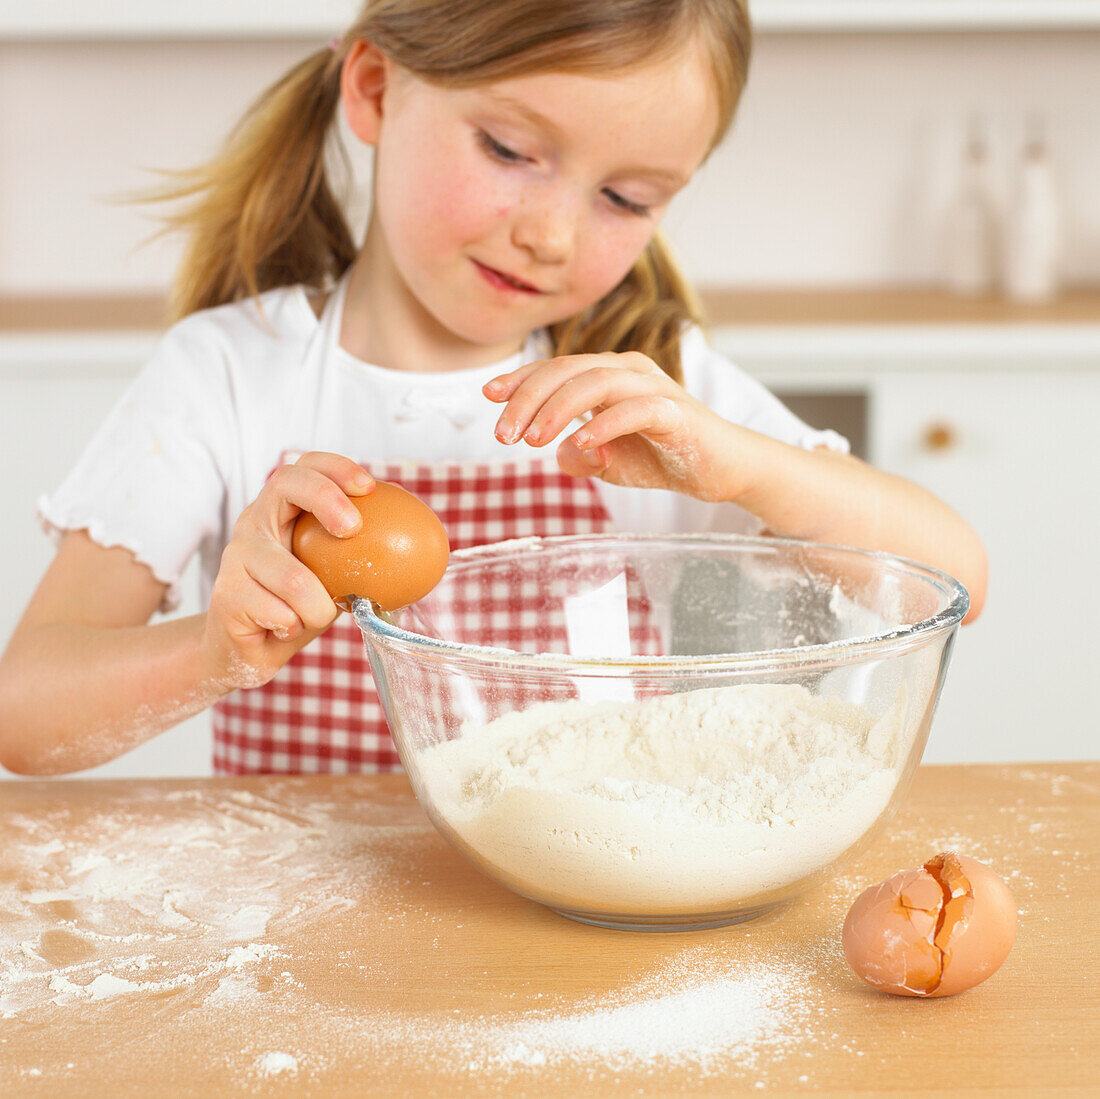 Girl cracking an egg on the side of a bowl of flour